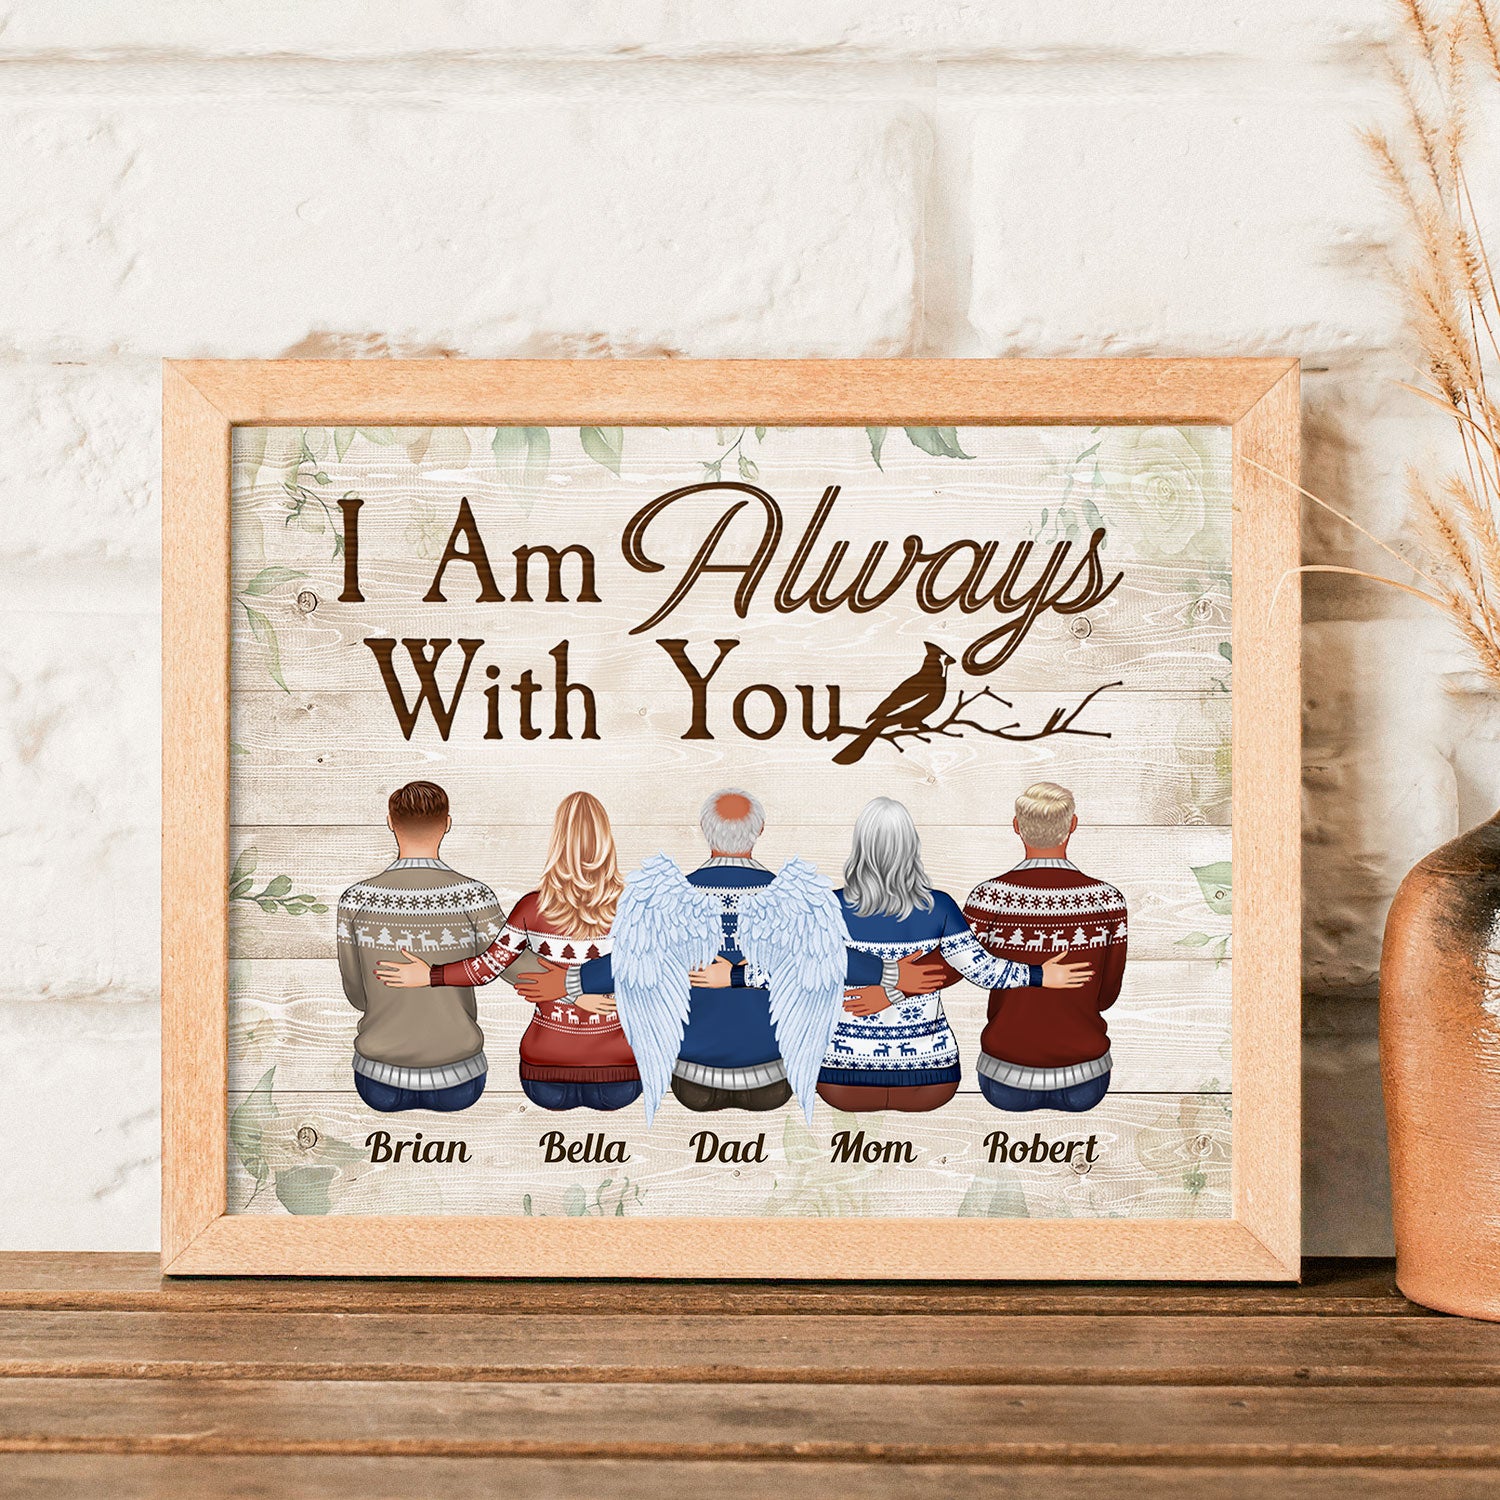 I Am Always With You - Personalized Poster - Memorial Gift For Family